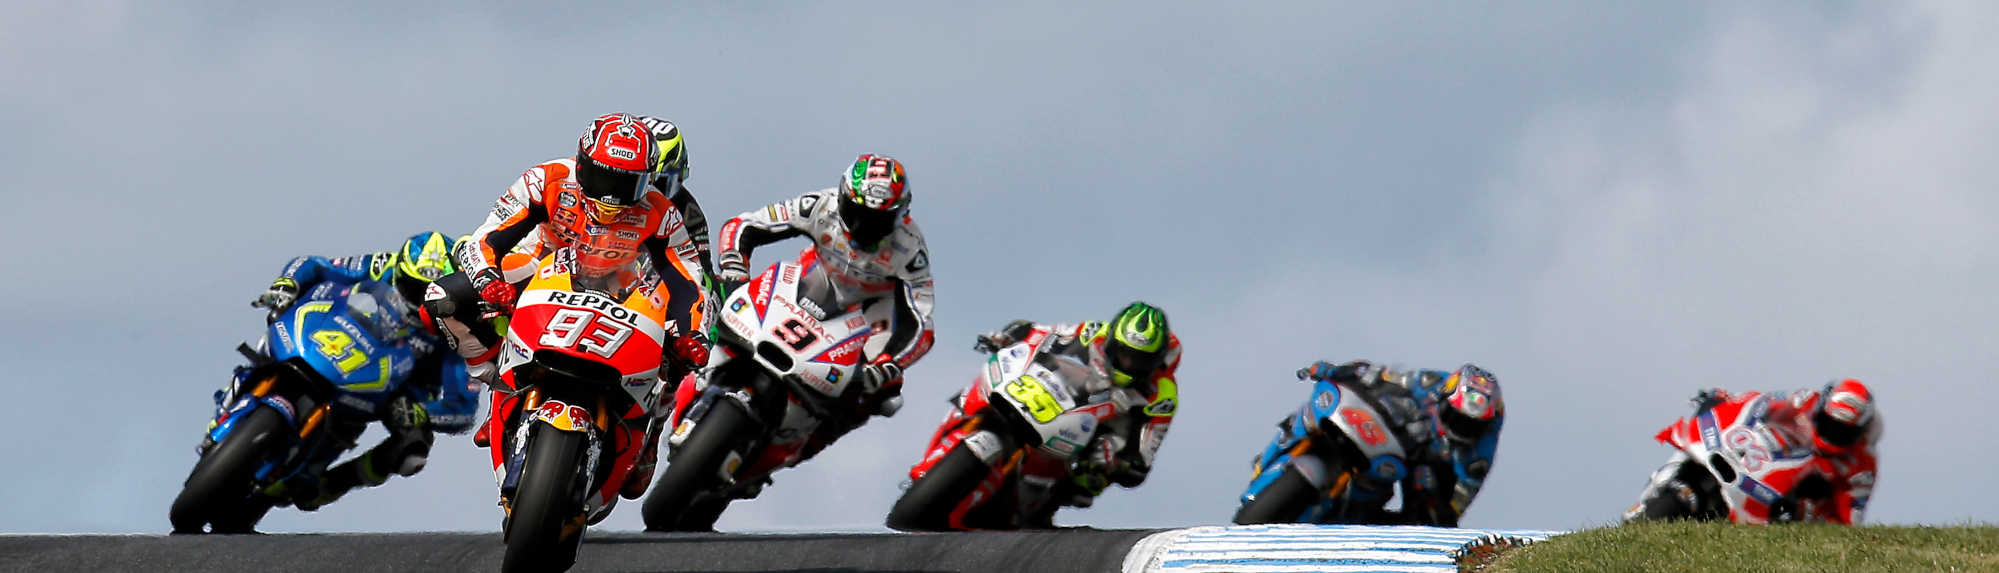 7 things you need to know about Phillip Island’s Motor GP